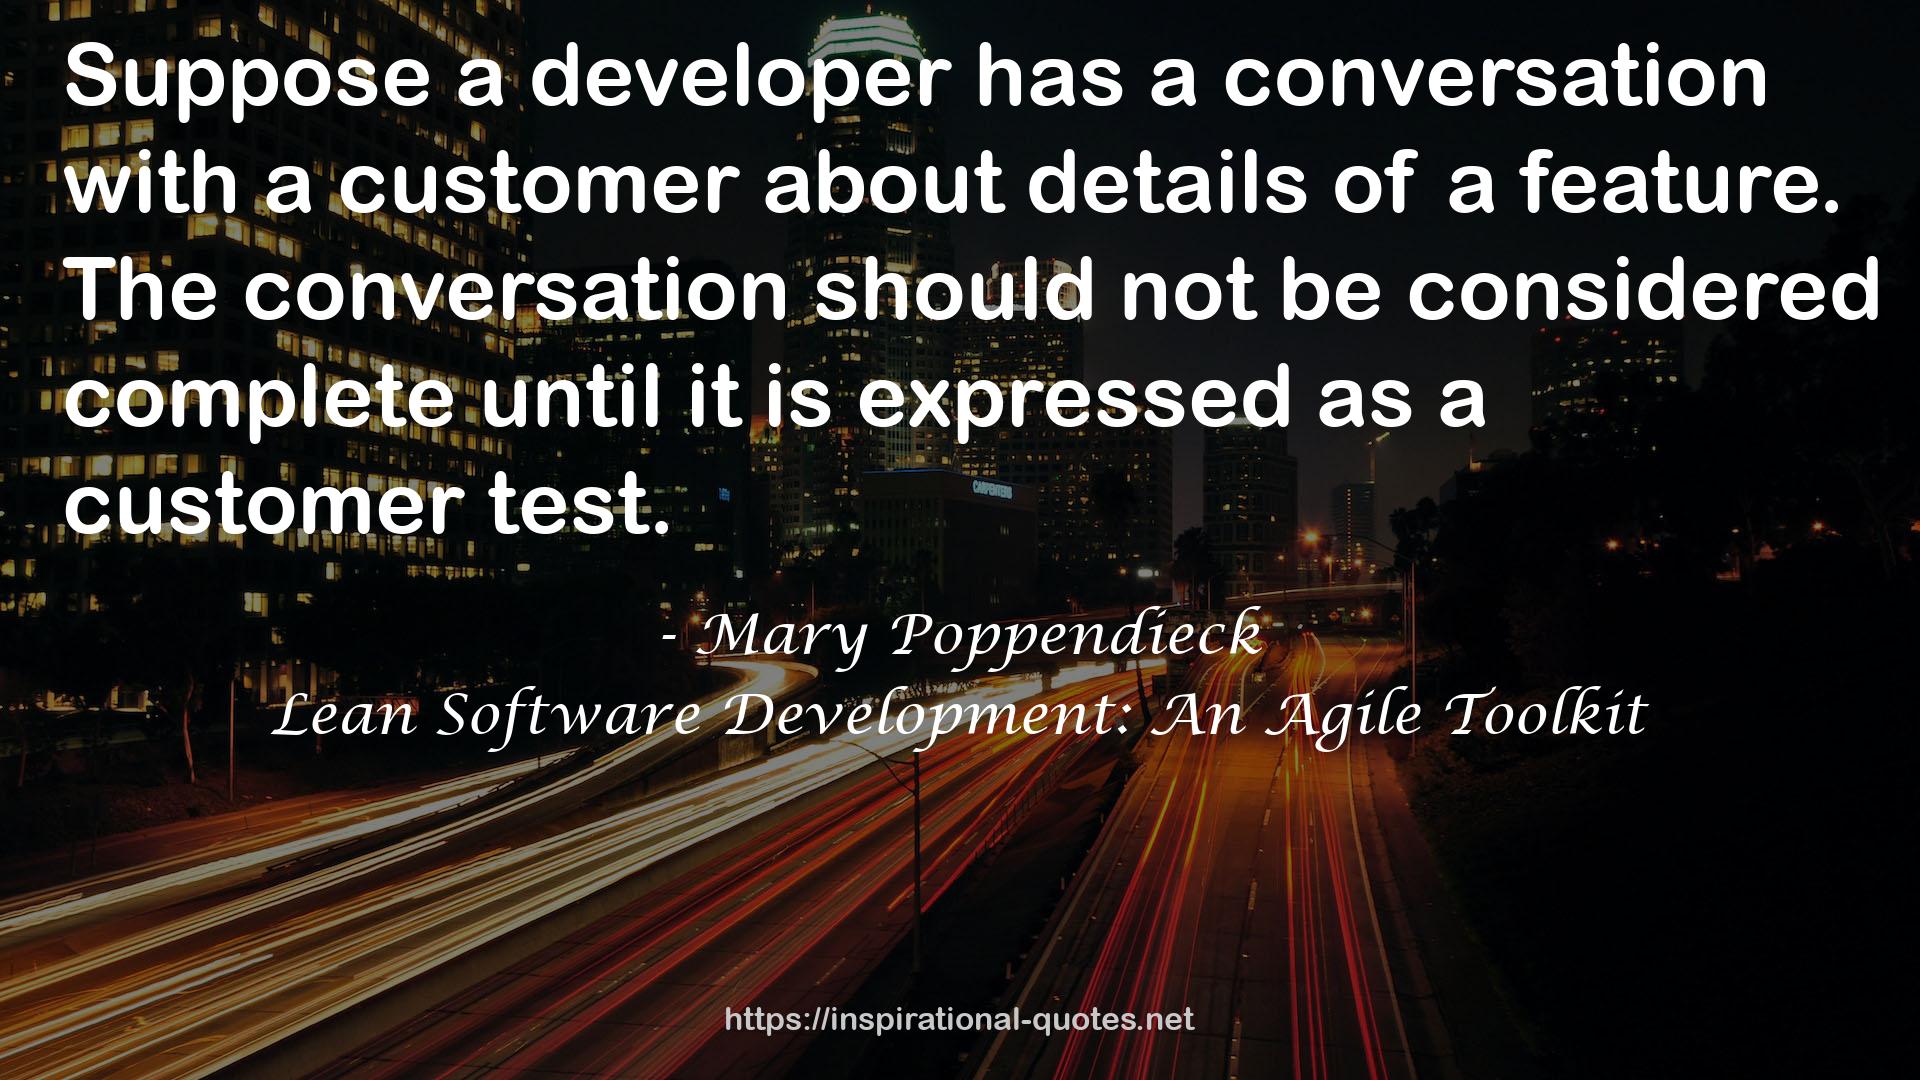 Lean Software Development: An Agile Toolkit QUOTES